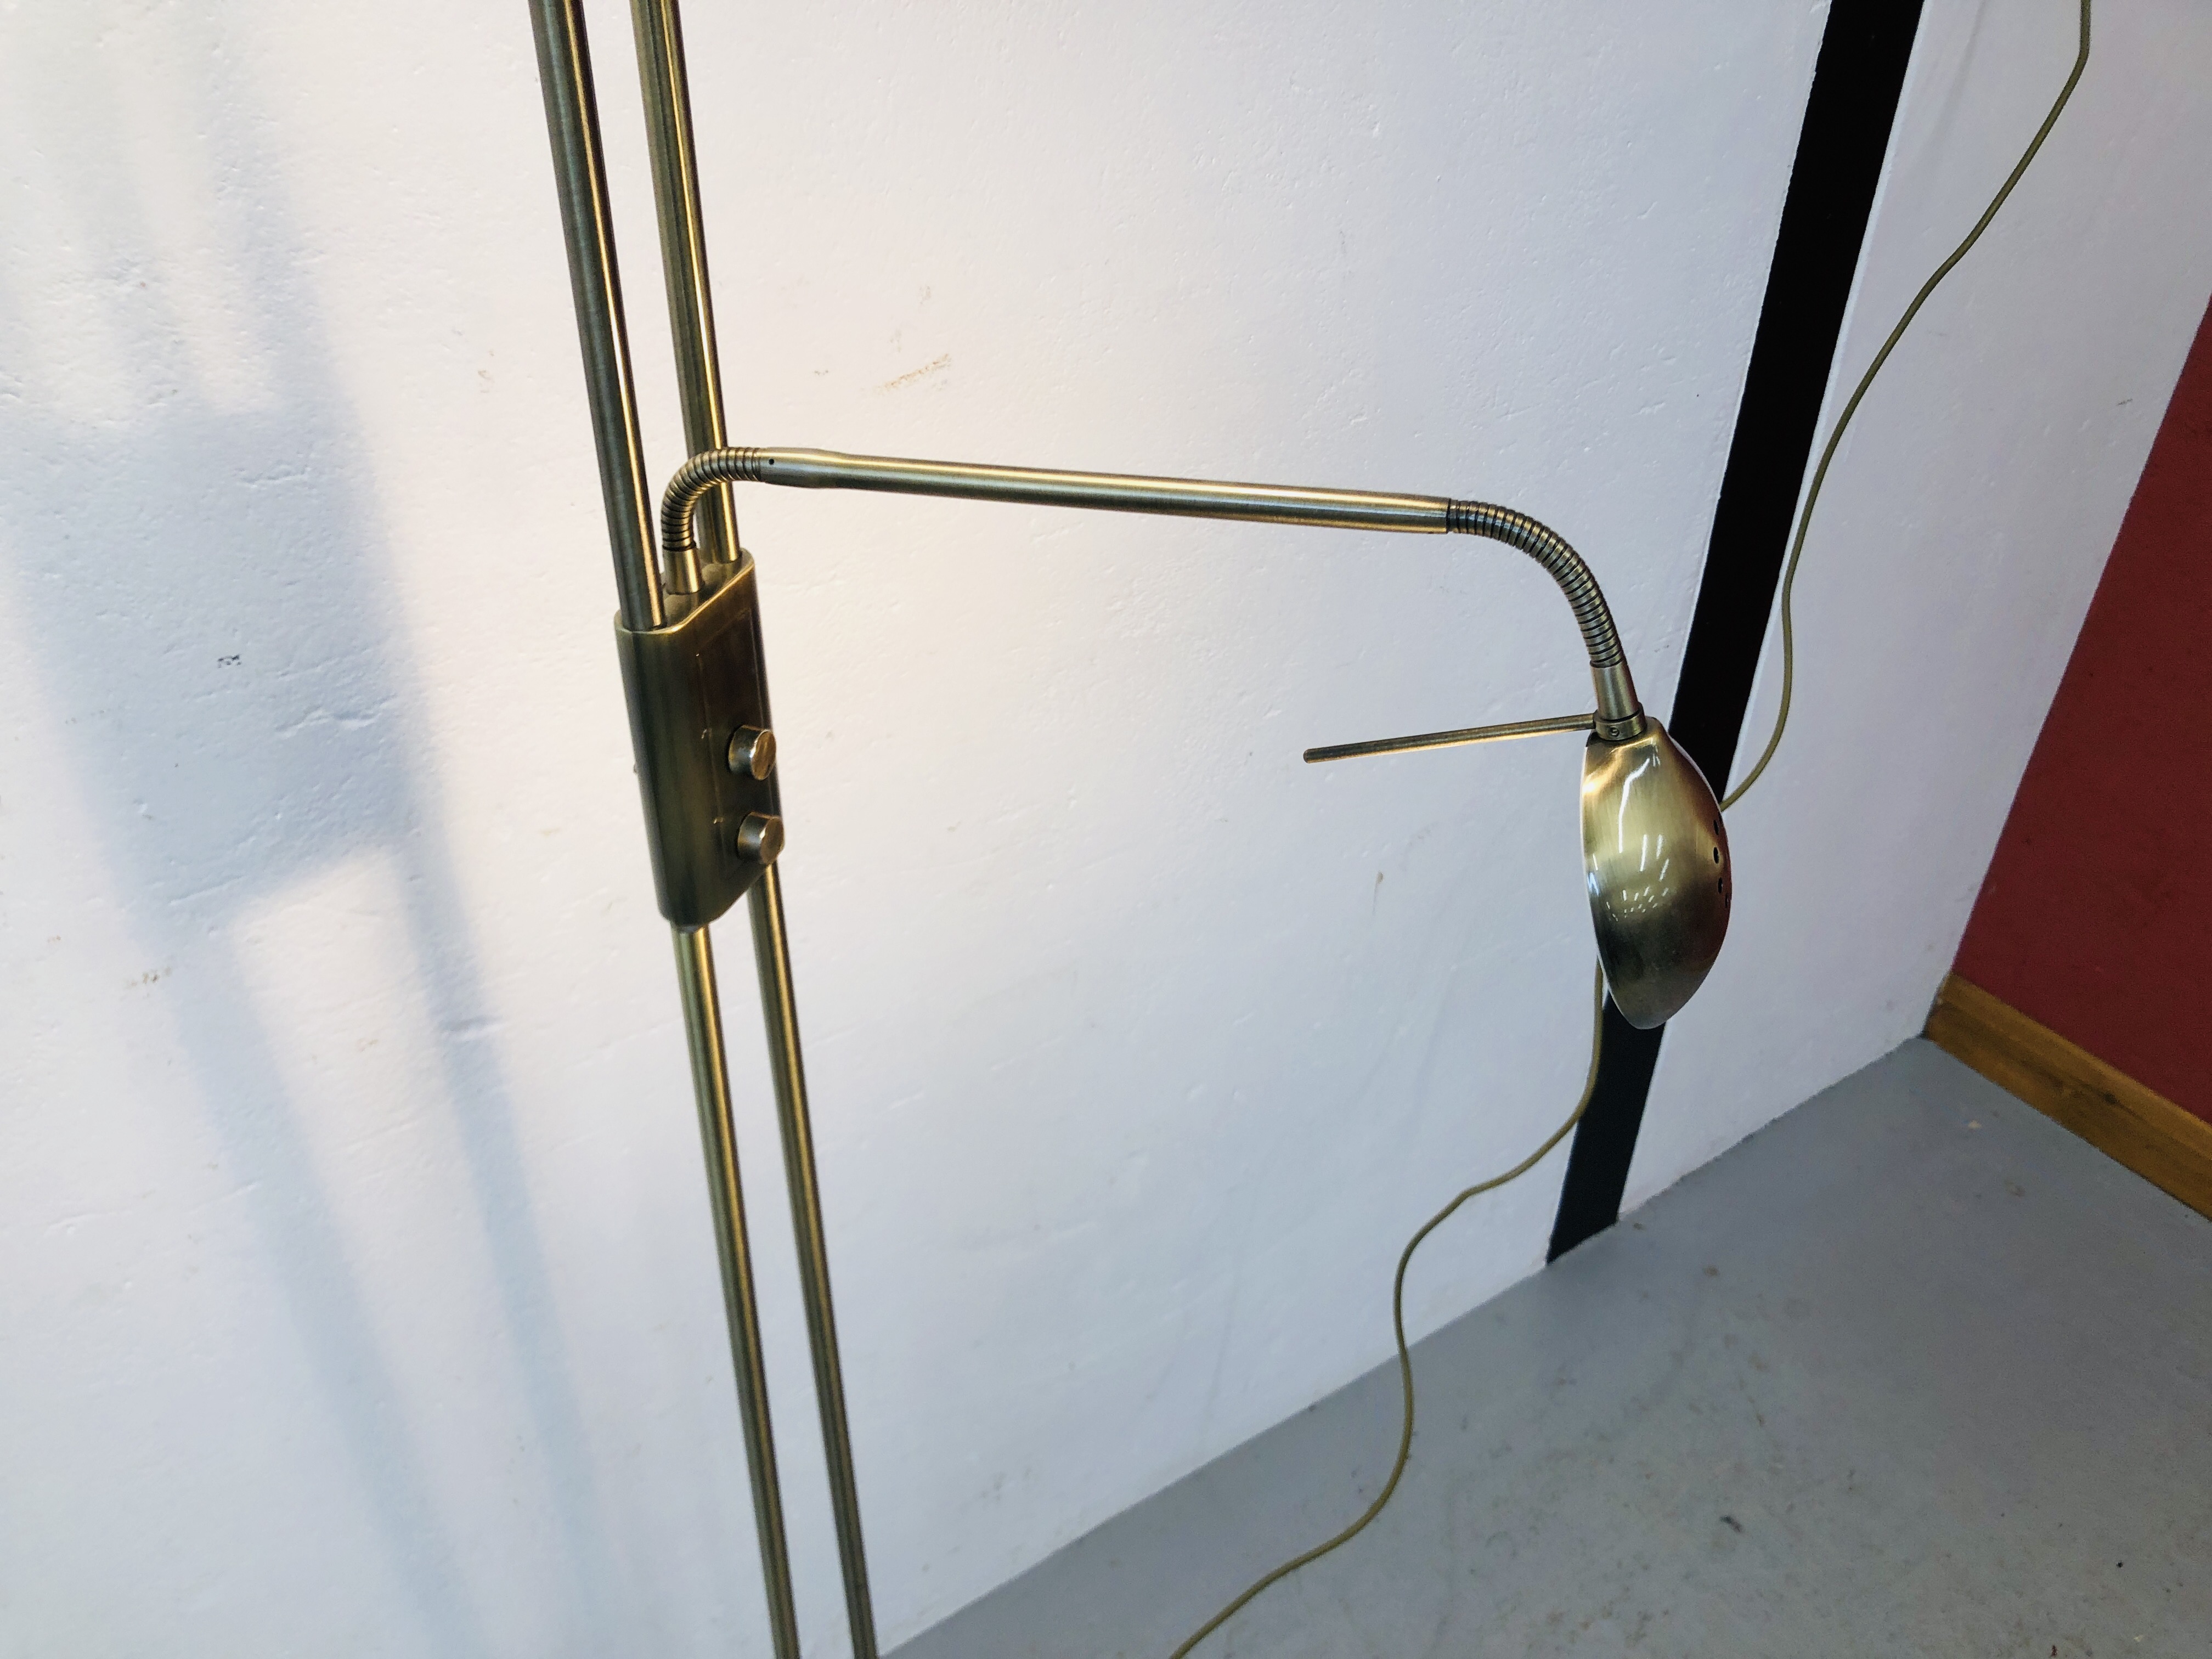 A MODERN BRASS FINISH UPLIGHTER WITH ADJUSTABLE READING LAMP - SOLD AS SEEN - Image 6 of 8